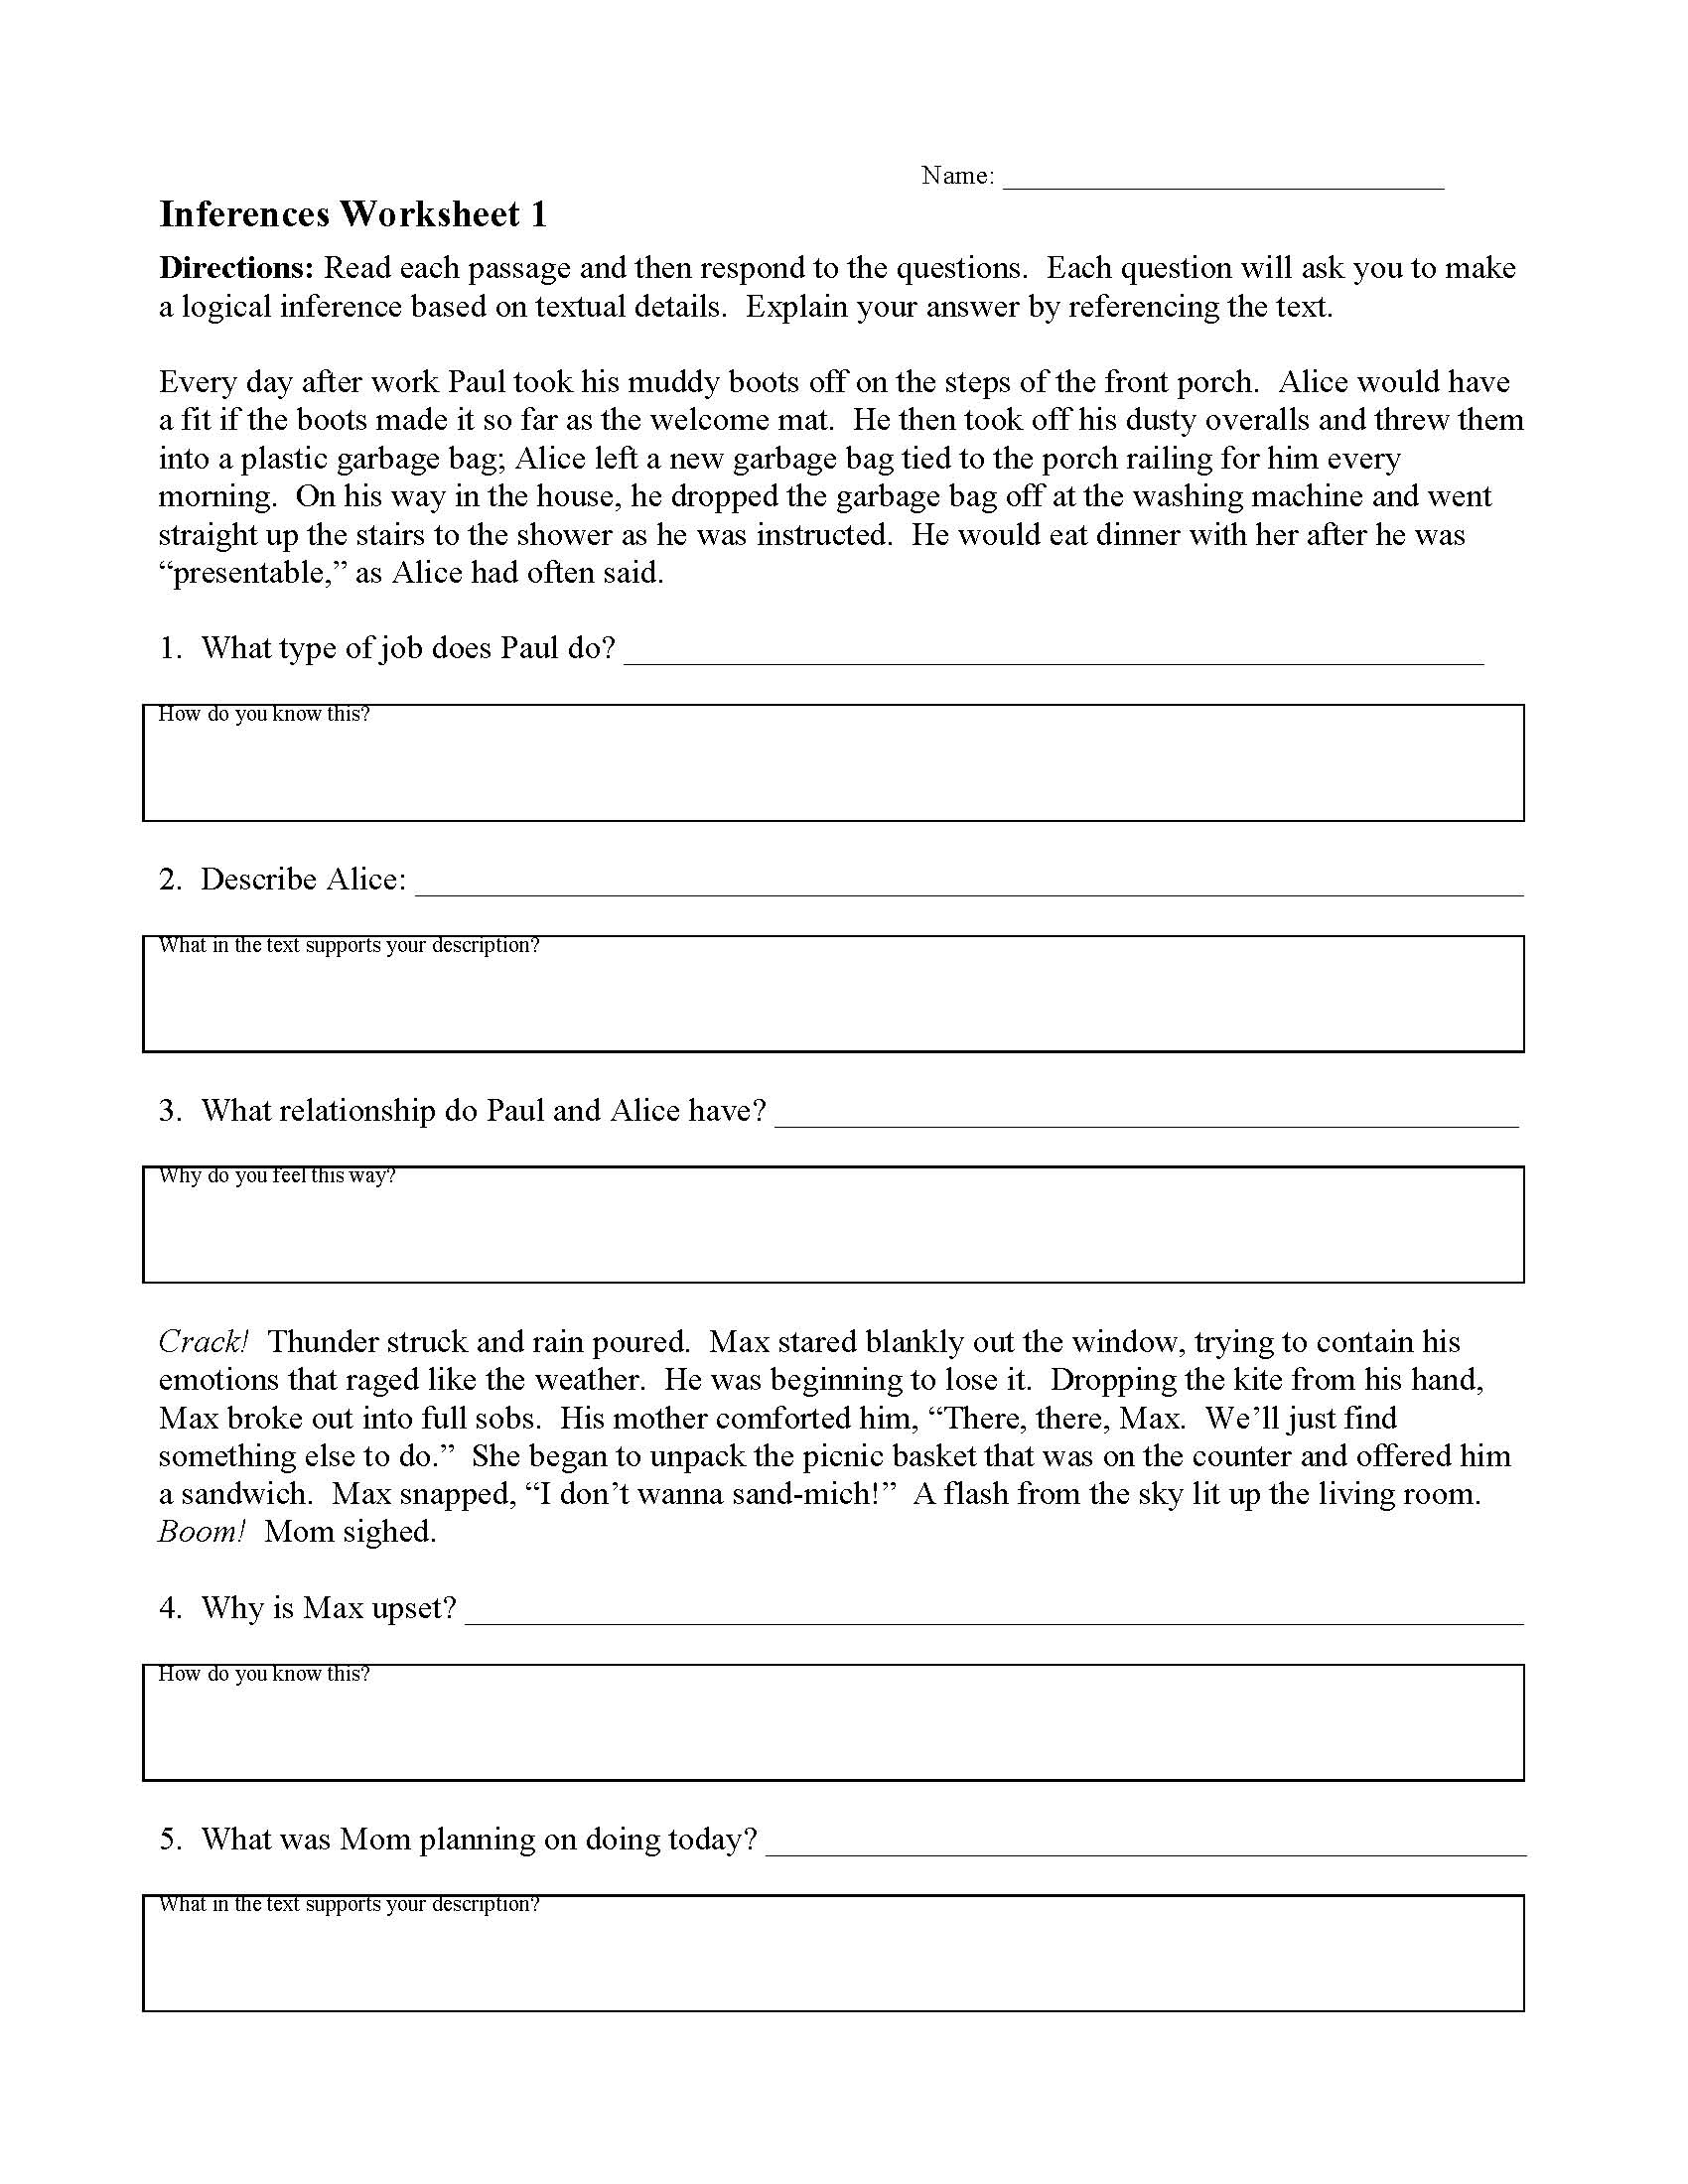 Inferences Worksheet 1 Reading Activity